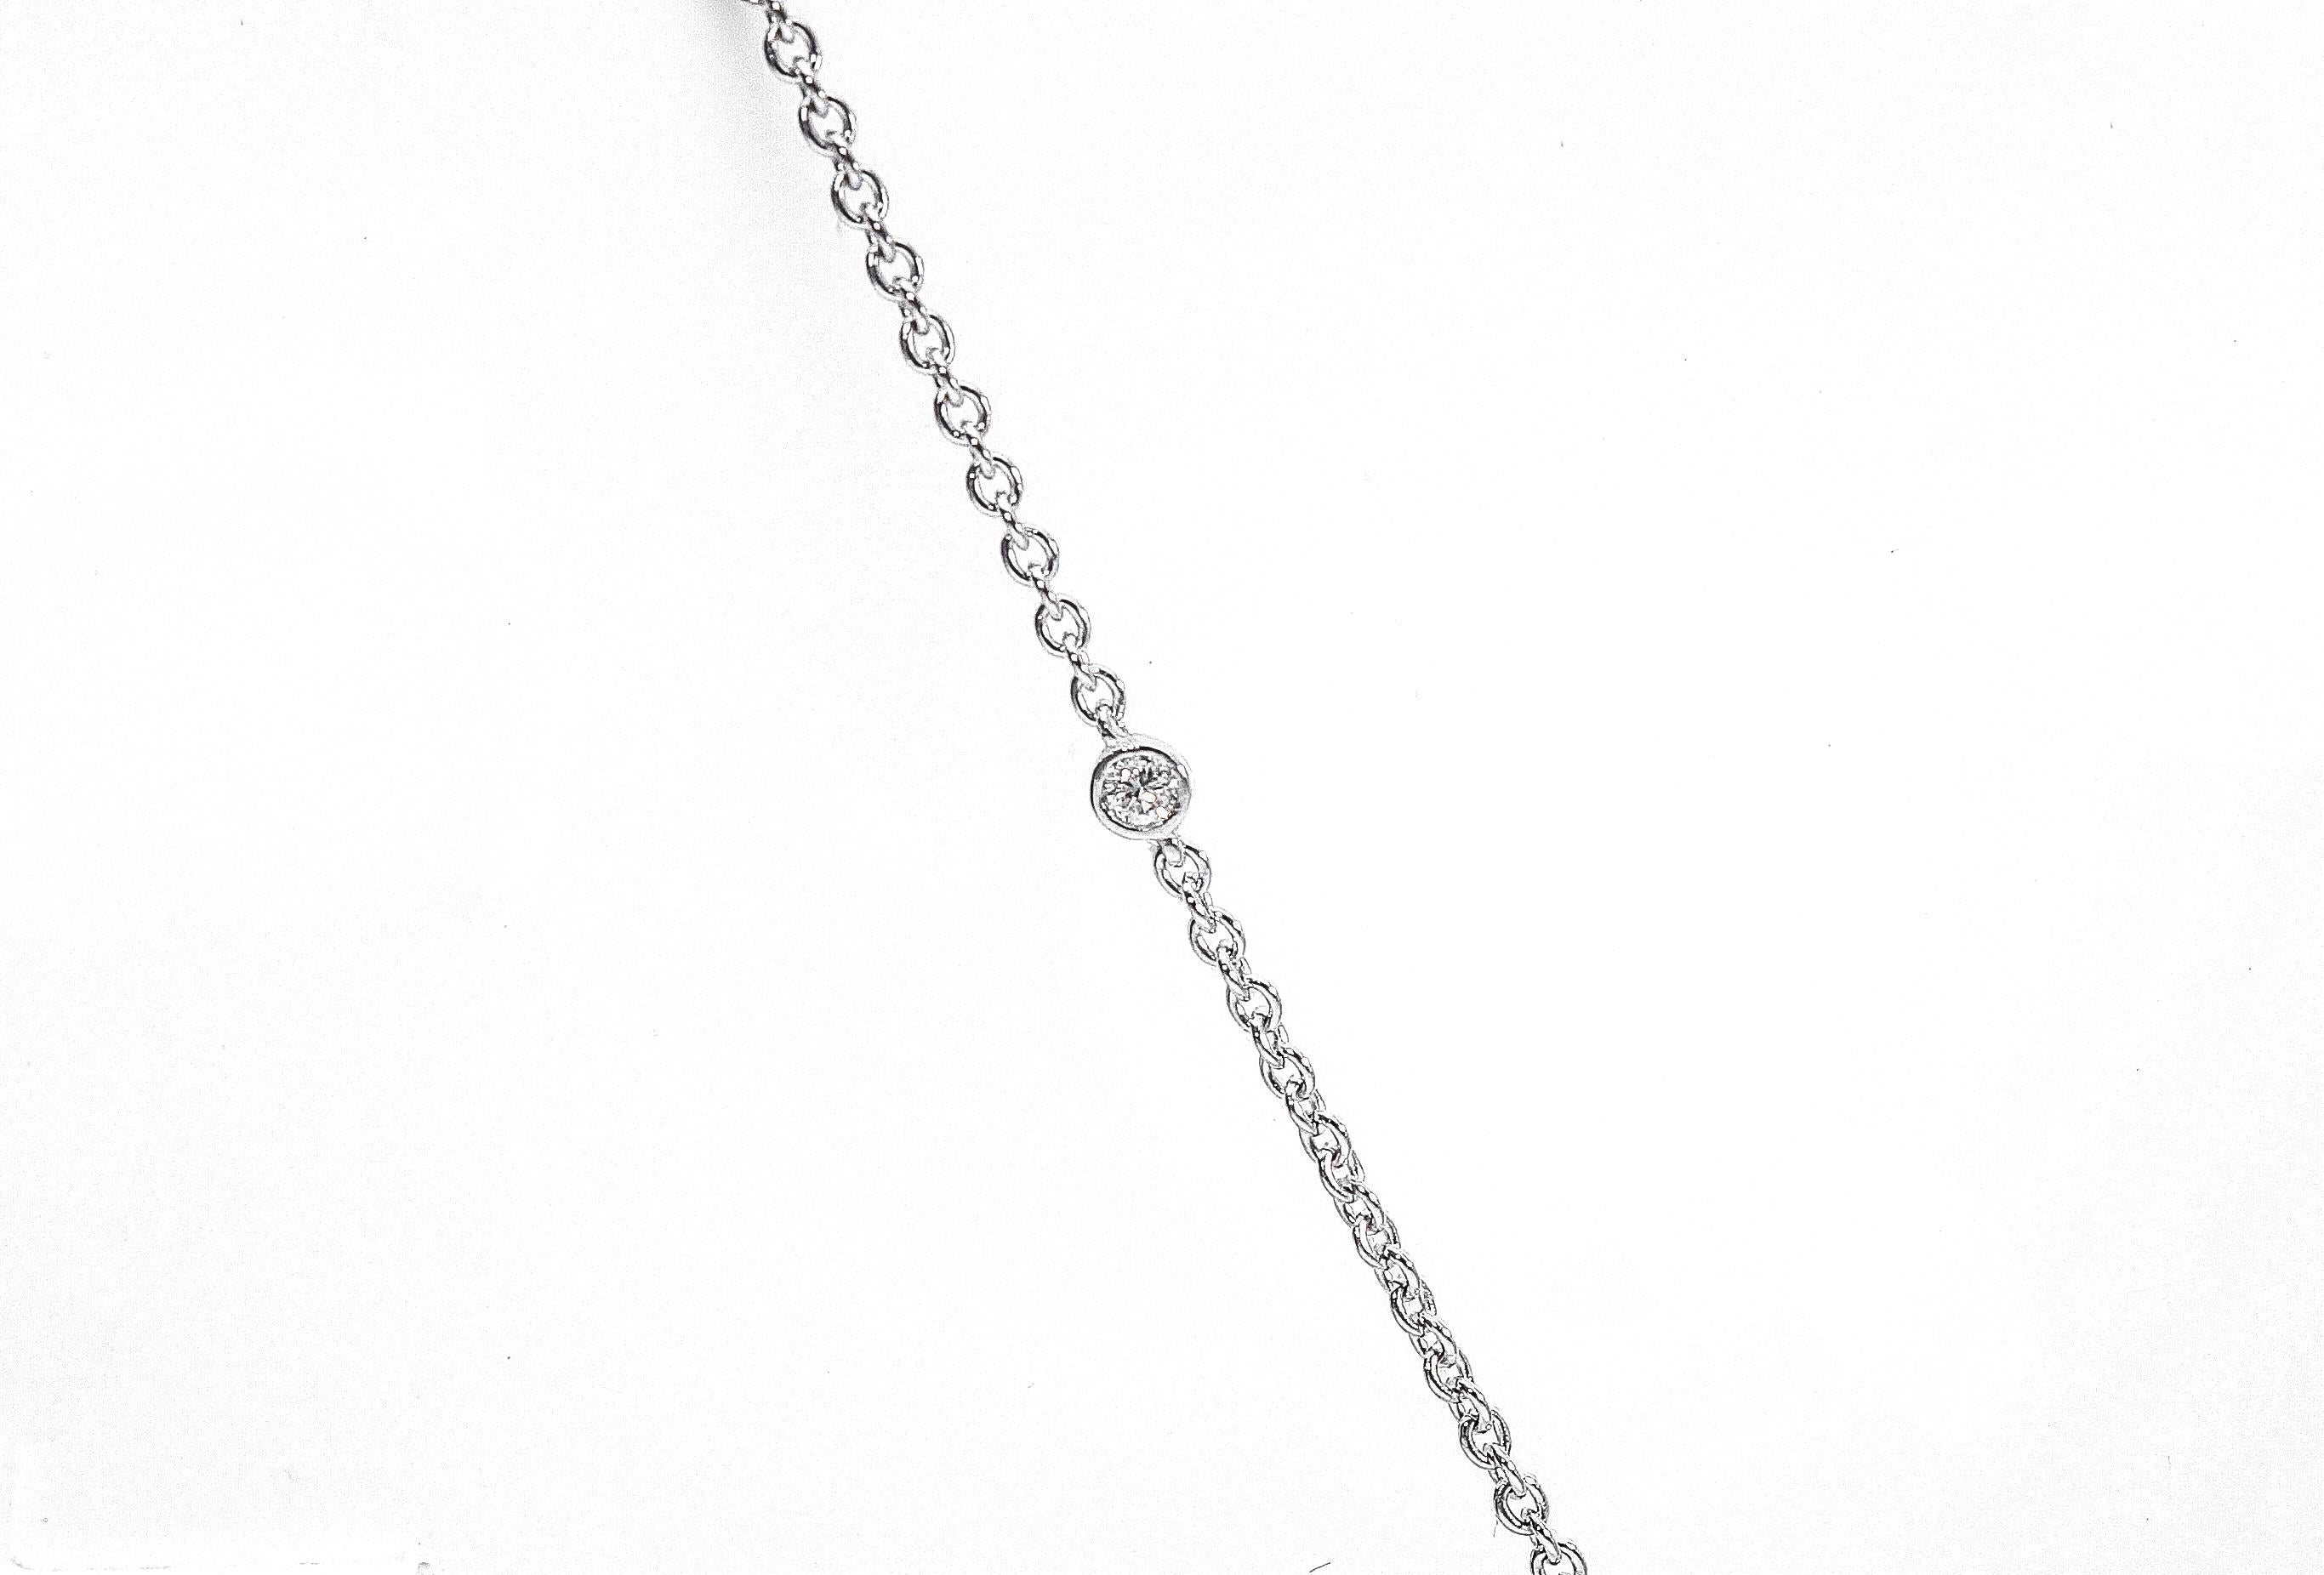 18 Karat White Gold Chain Necklace with Rectangular Diamonds Pendant For Sale 2